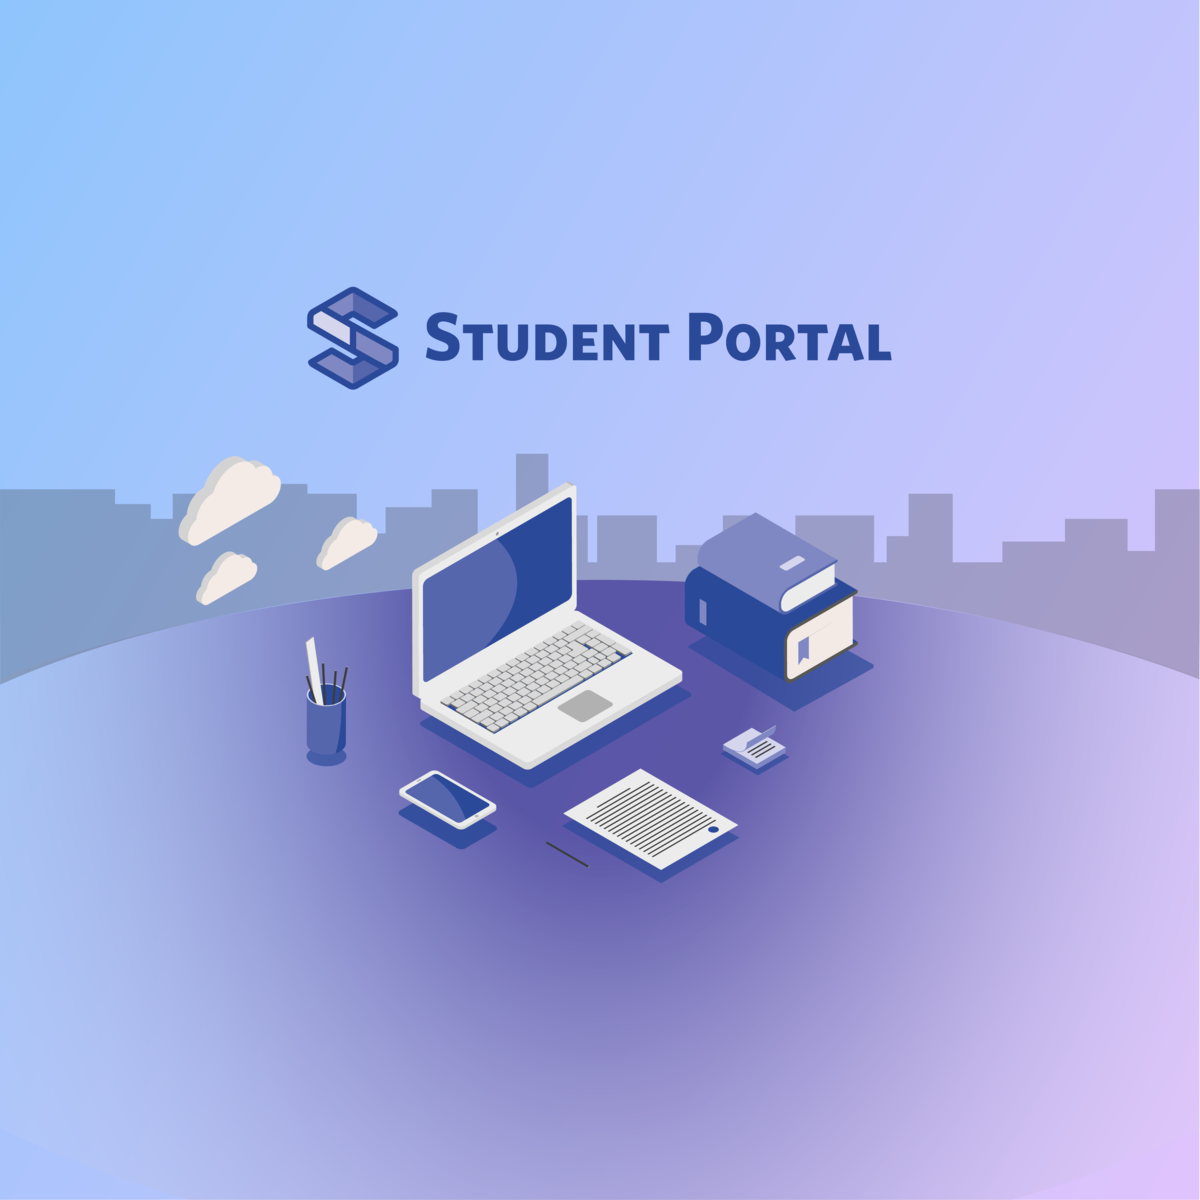 Download Student Portal graphics by Amy Em on Dribbble